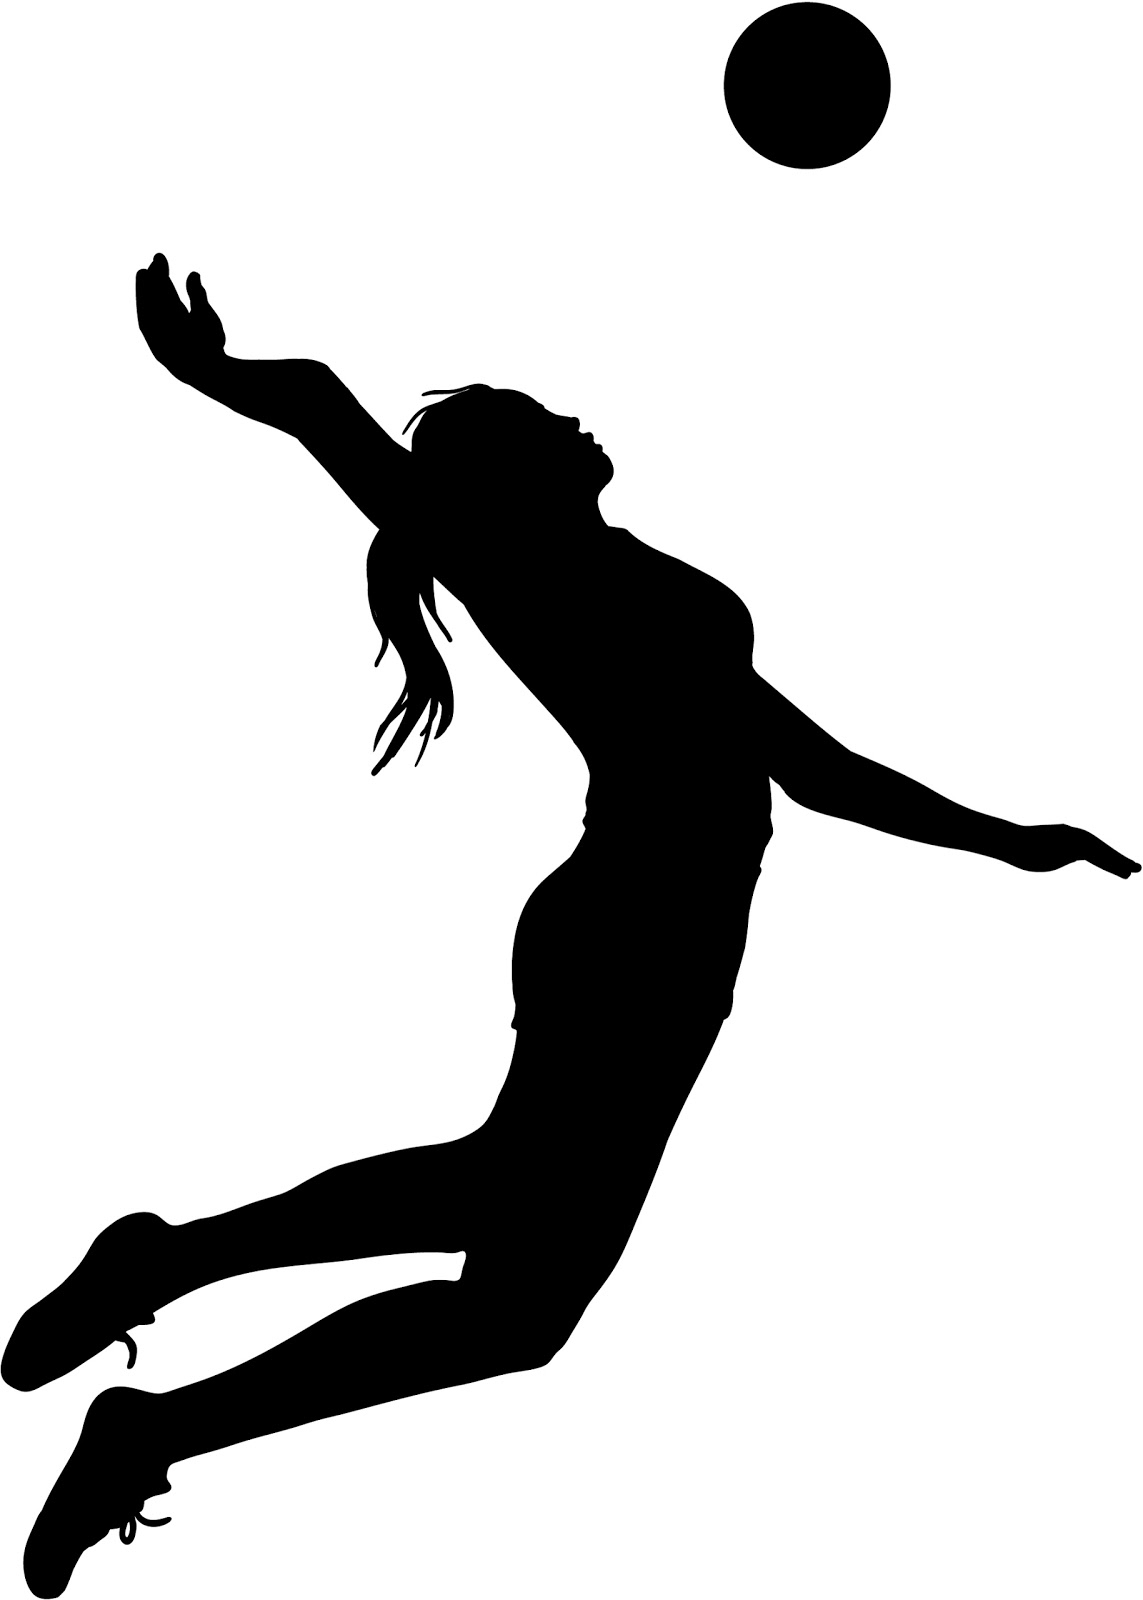 Volleyball Player Silhouette .